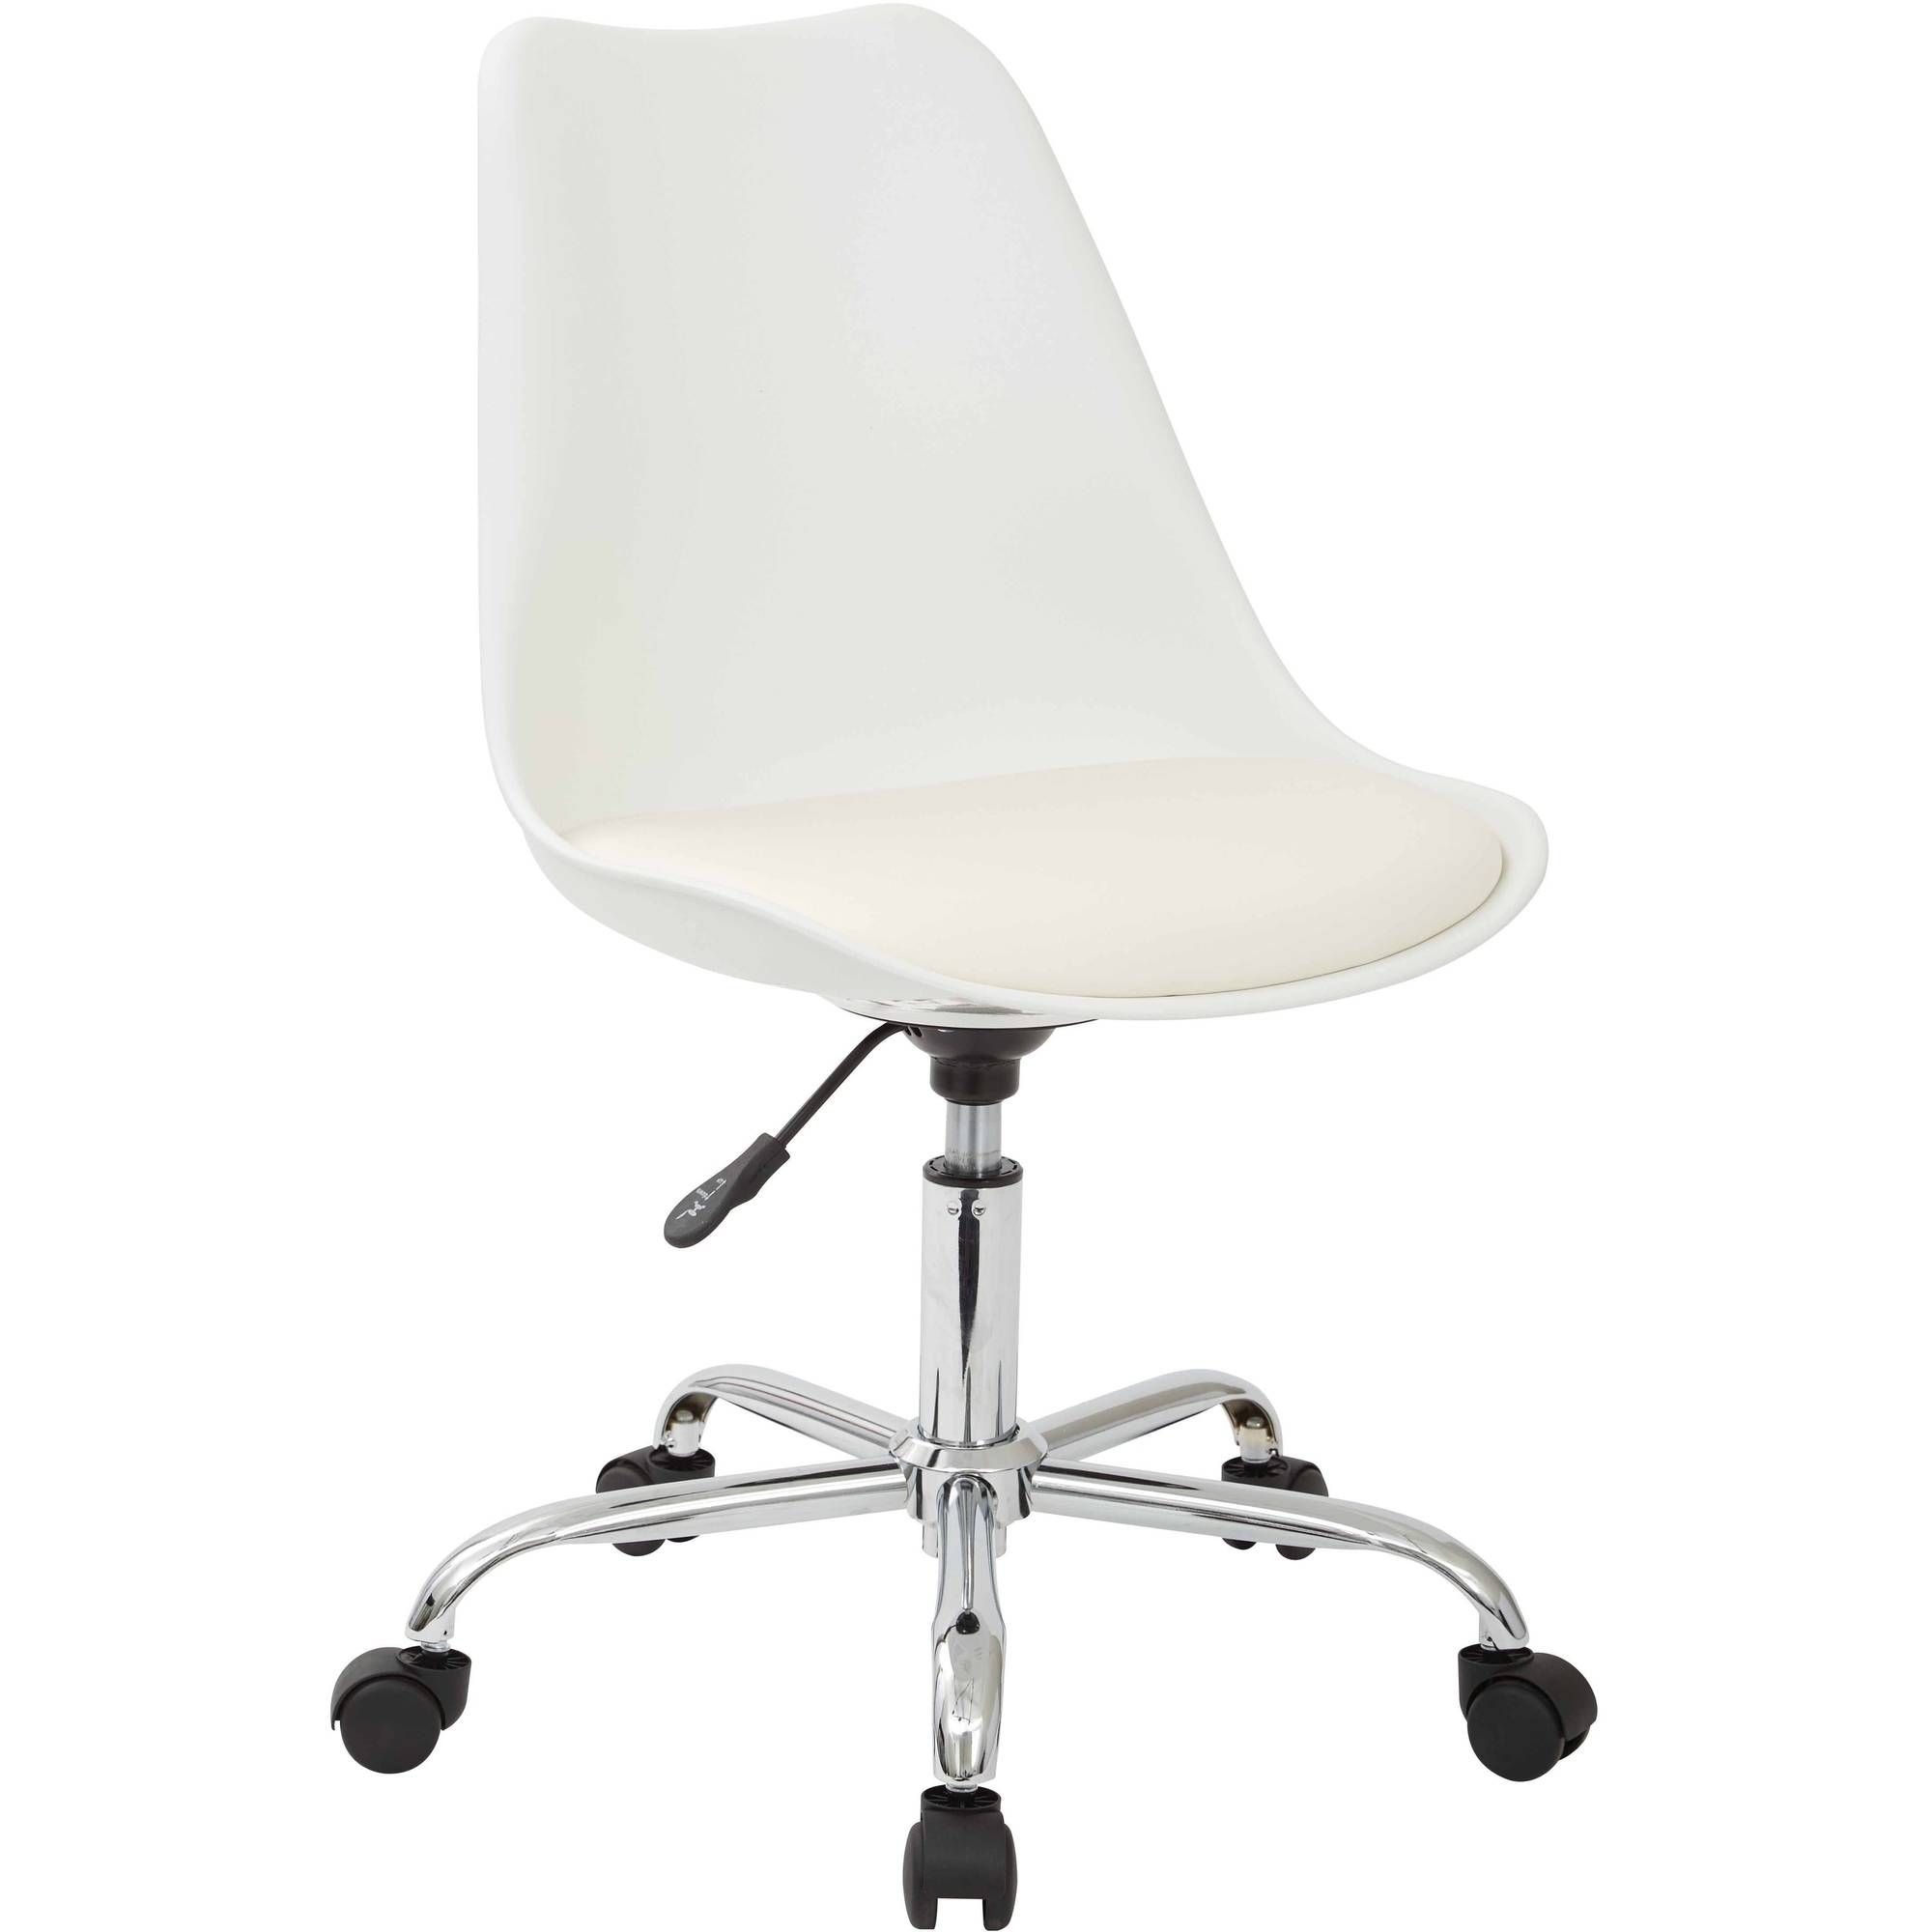 Emerson Student Office Chair White – Walmart – Walmart Throughout Office Sofas And Chairs (View 4 of 15)